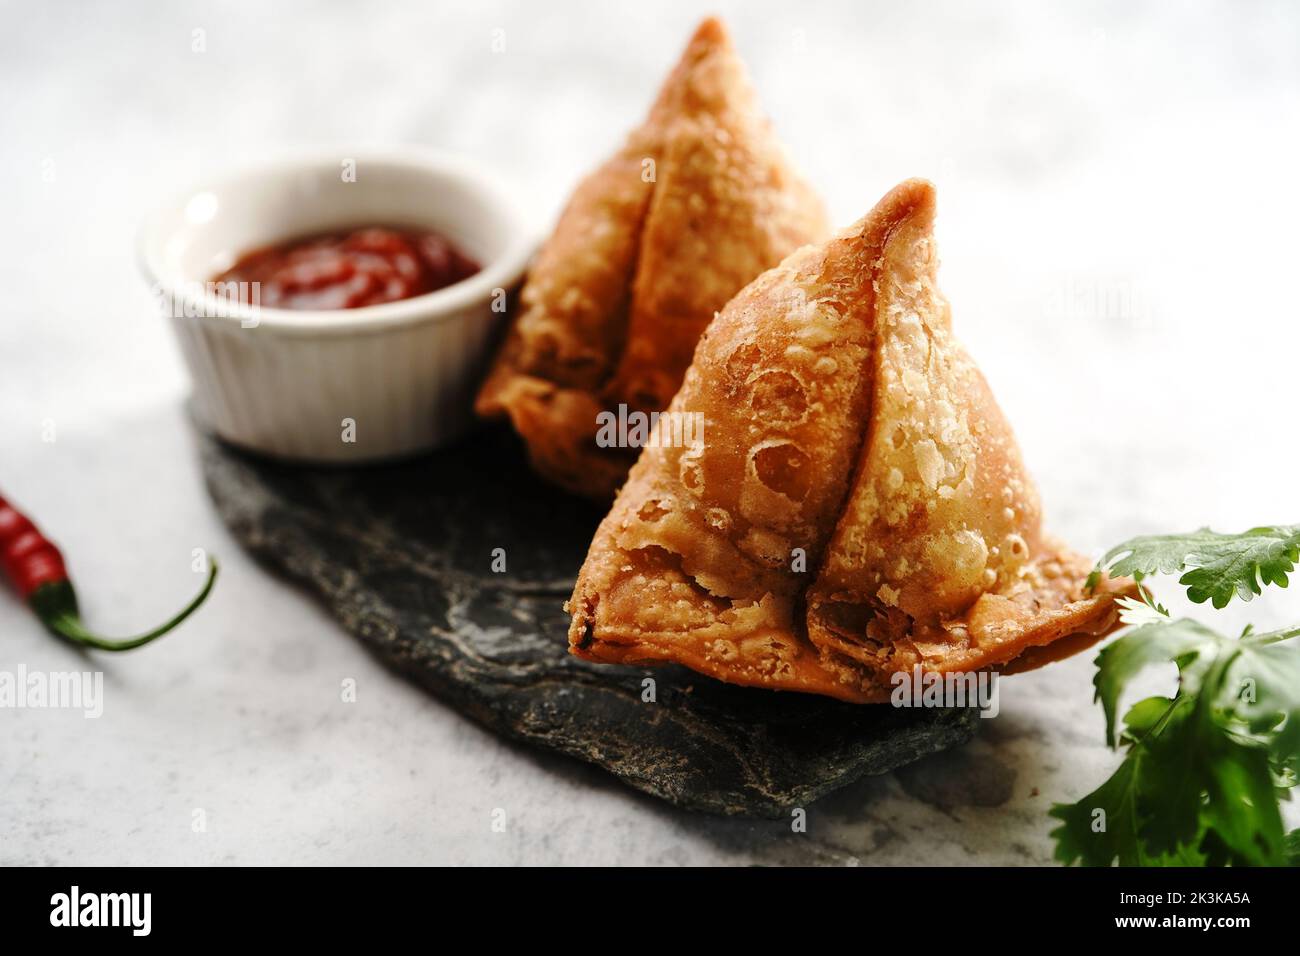 Samosa - Indian triangle pastry with potato filling  Diwali snacks, selective focus Stock Photo